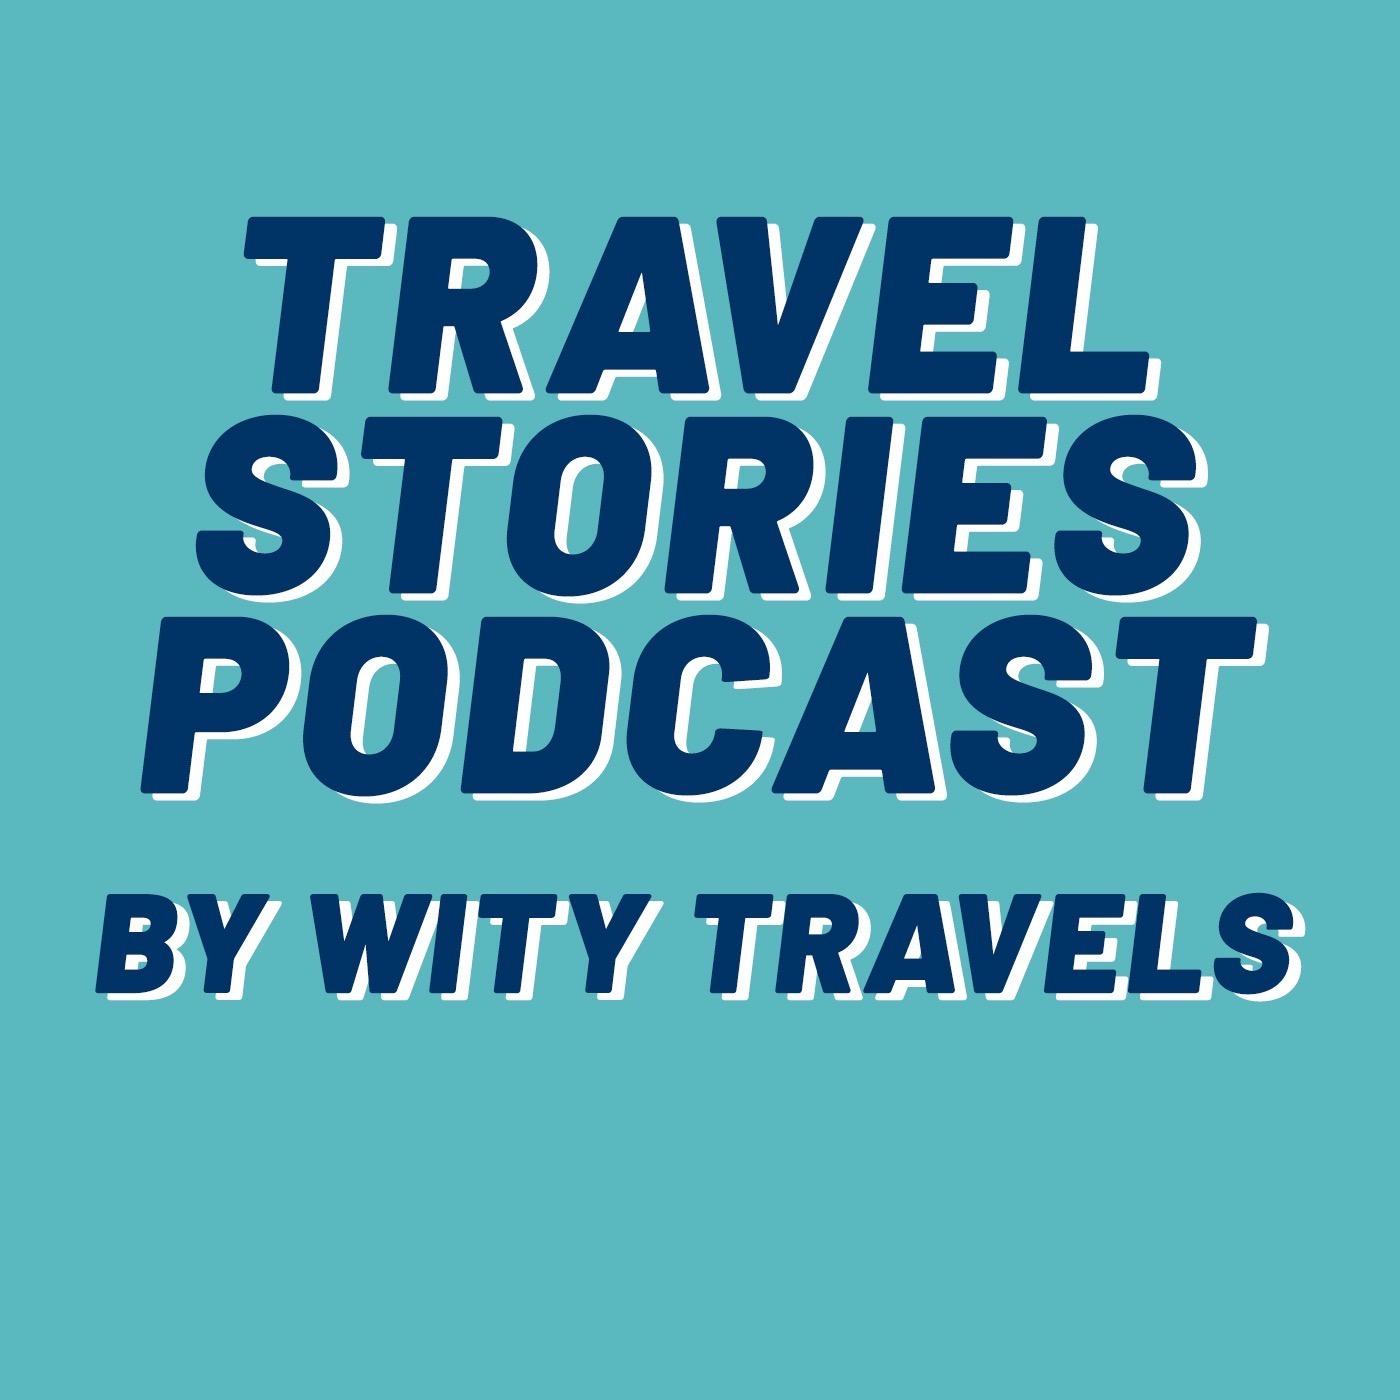 TRAVEL STORIES BY WITY TRAVELS